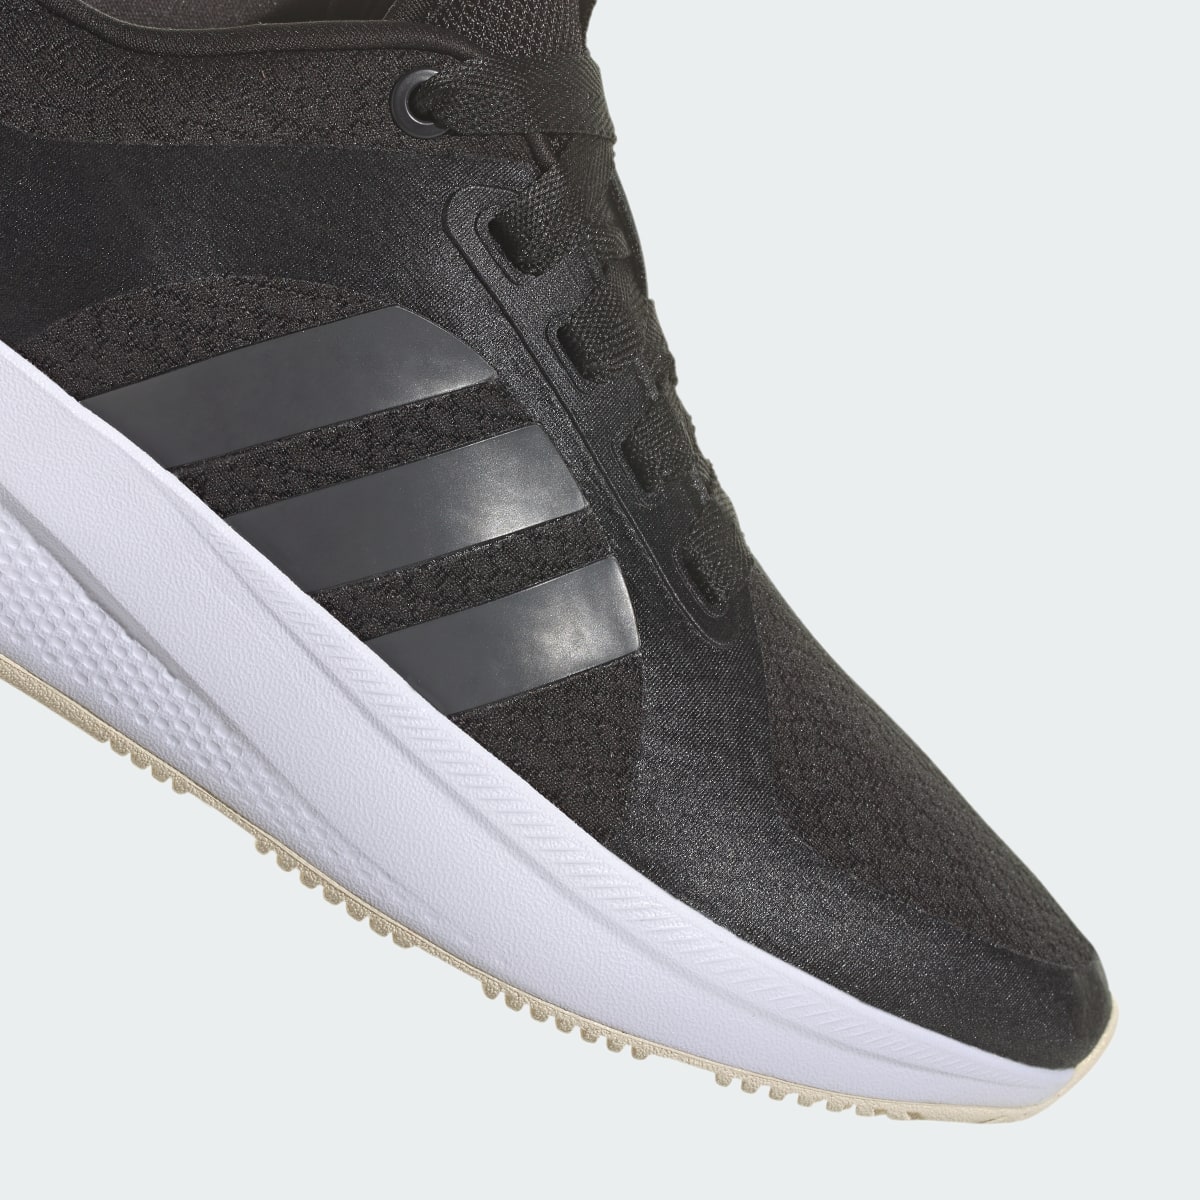 Adidas Edge Lux 6.0 Shoes. 9